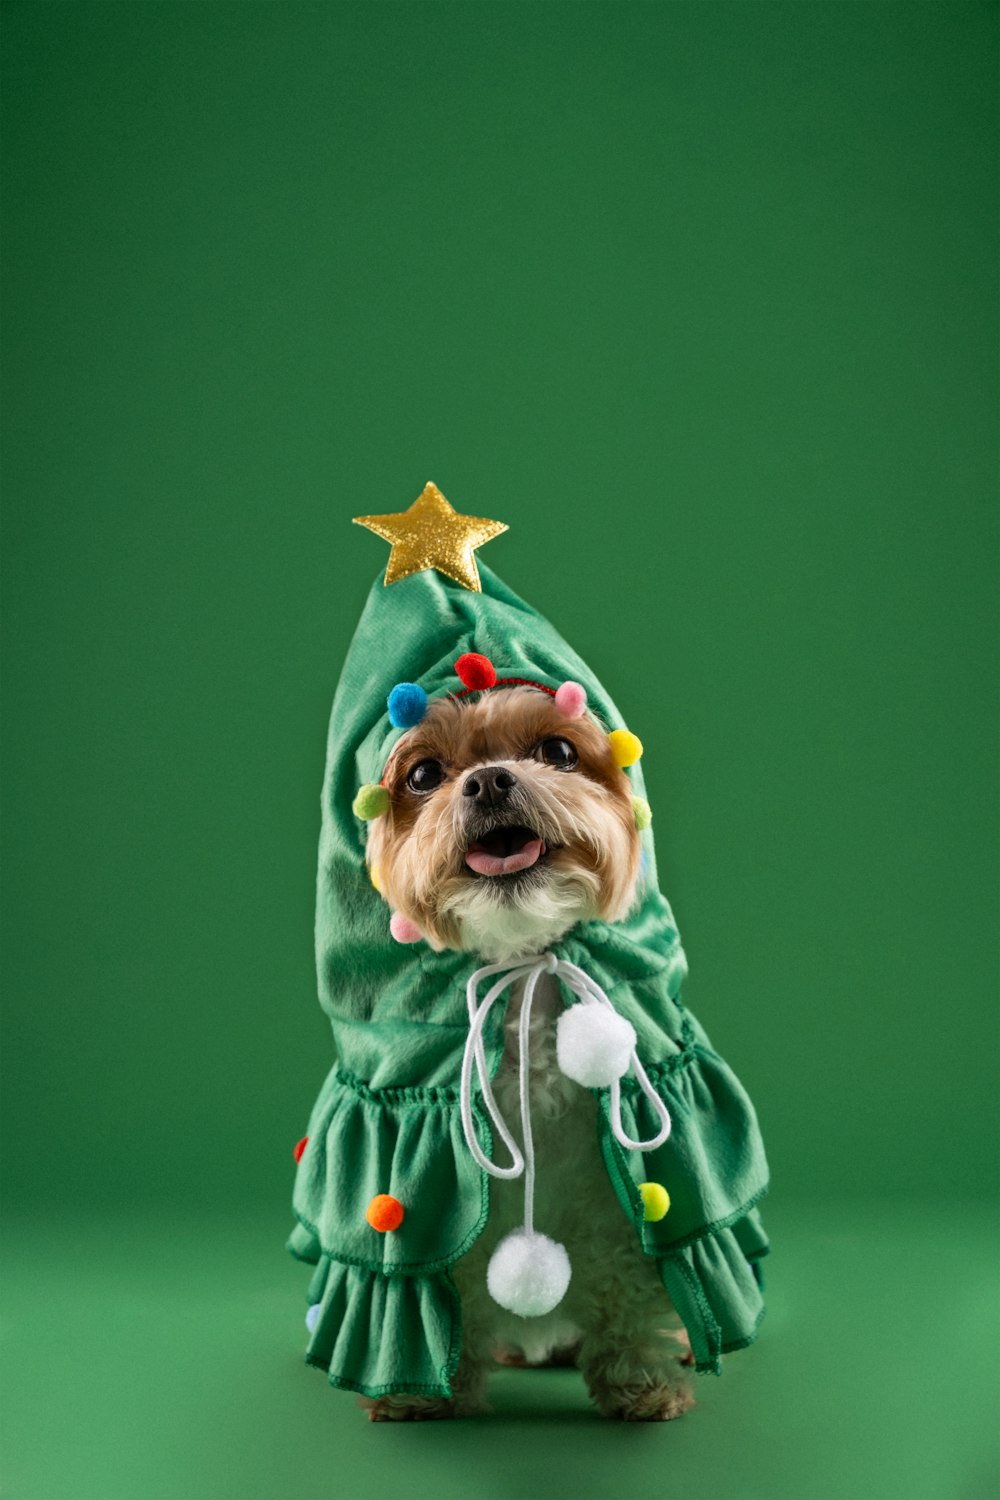 a small dog wearing a green christmas tree costume